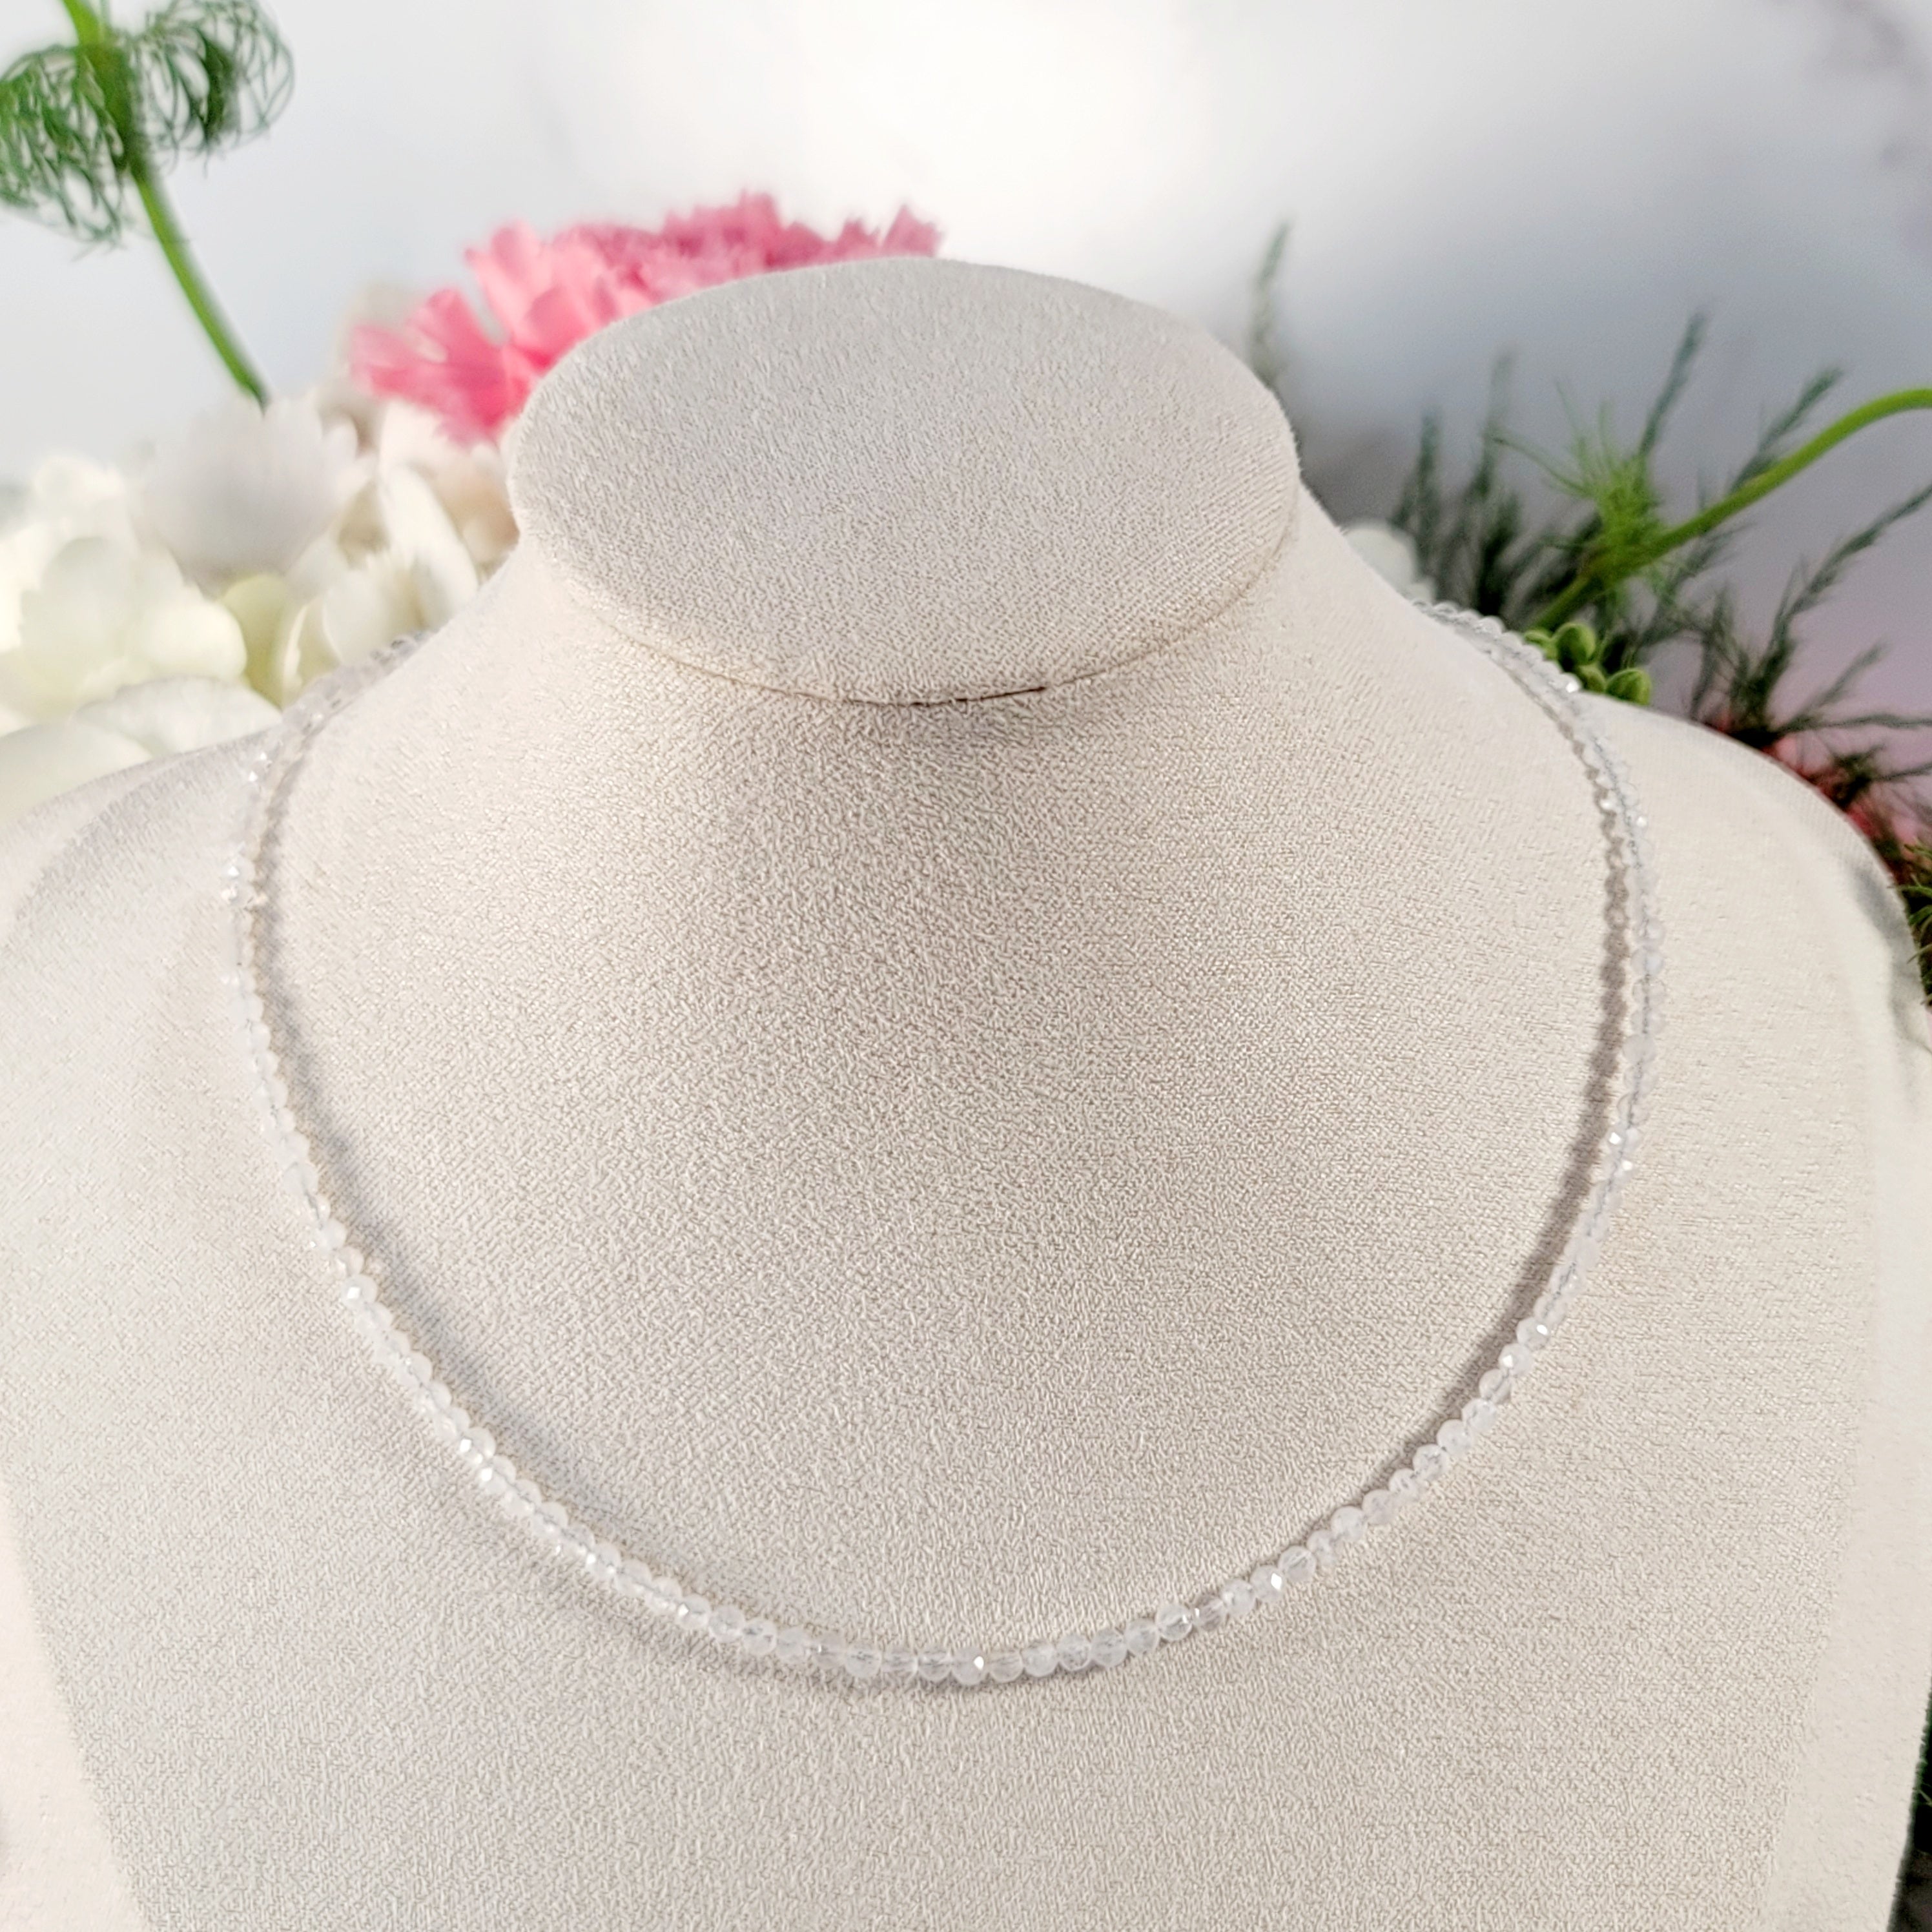 Rainbow Moonstone Micro Faceted Choker/Layering Necklace for Embracing New Beginnings